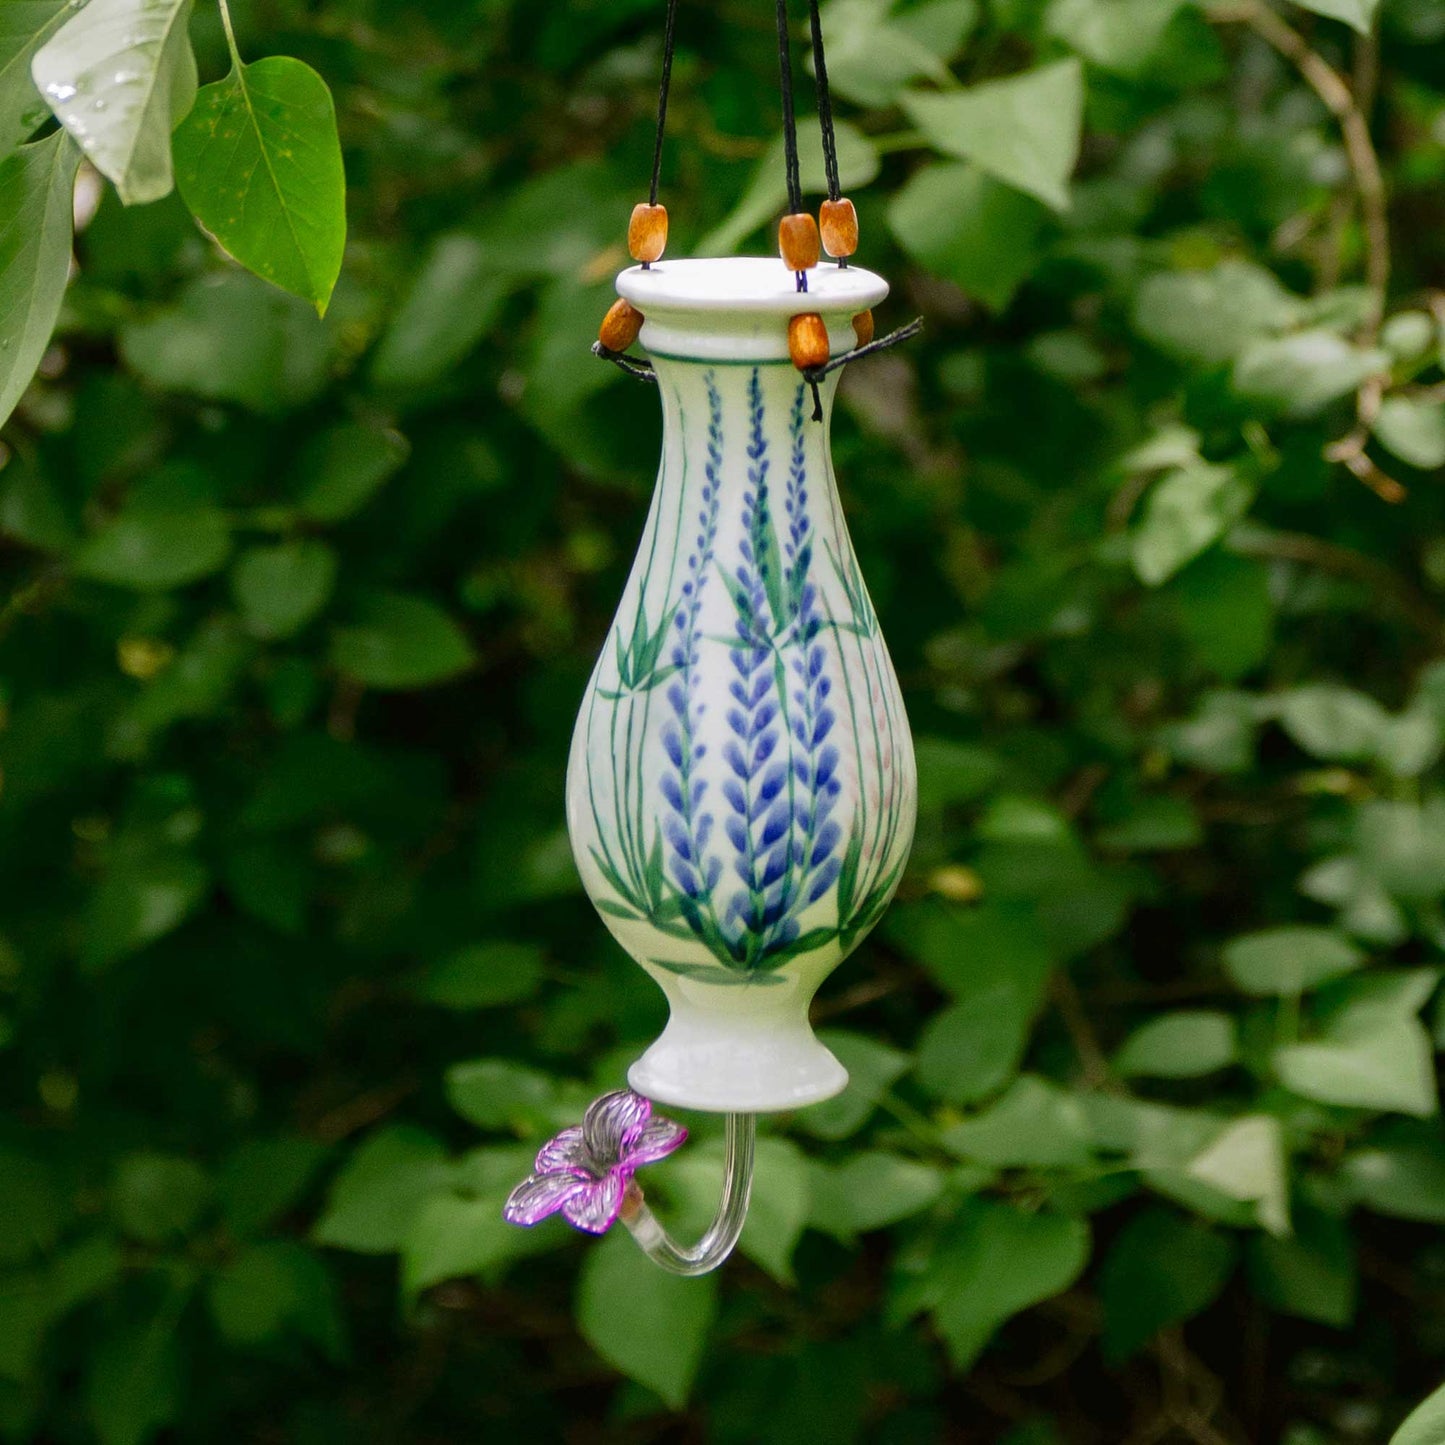 Handmade Pottery Bottle Hummingbird Feeder in Lupine pattern made by Georgetown Pottery in Maine